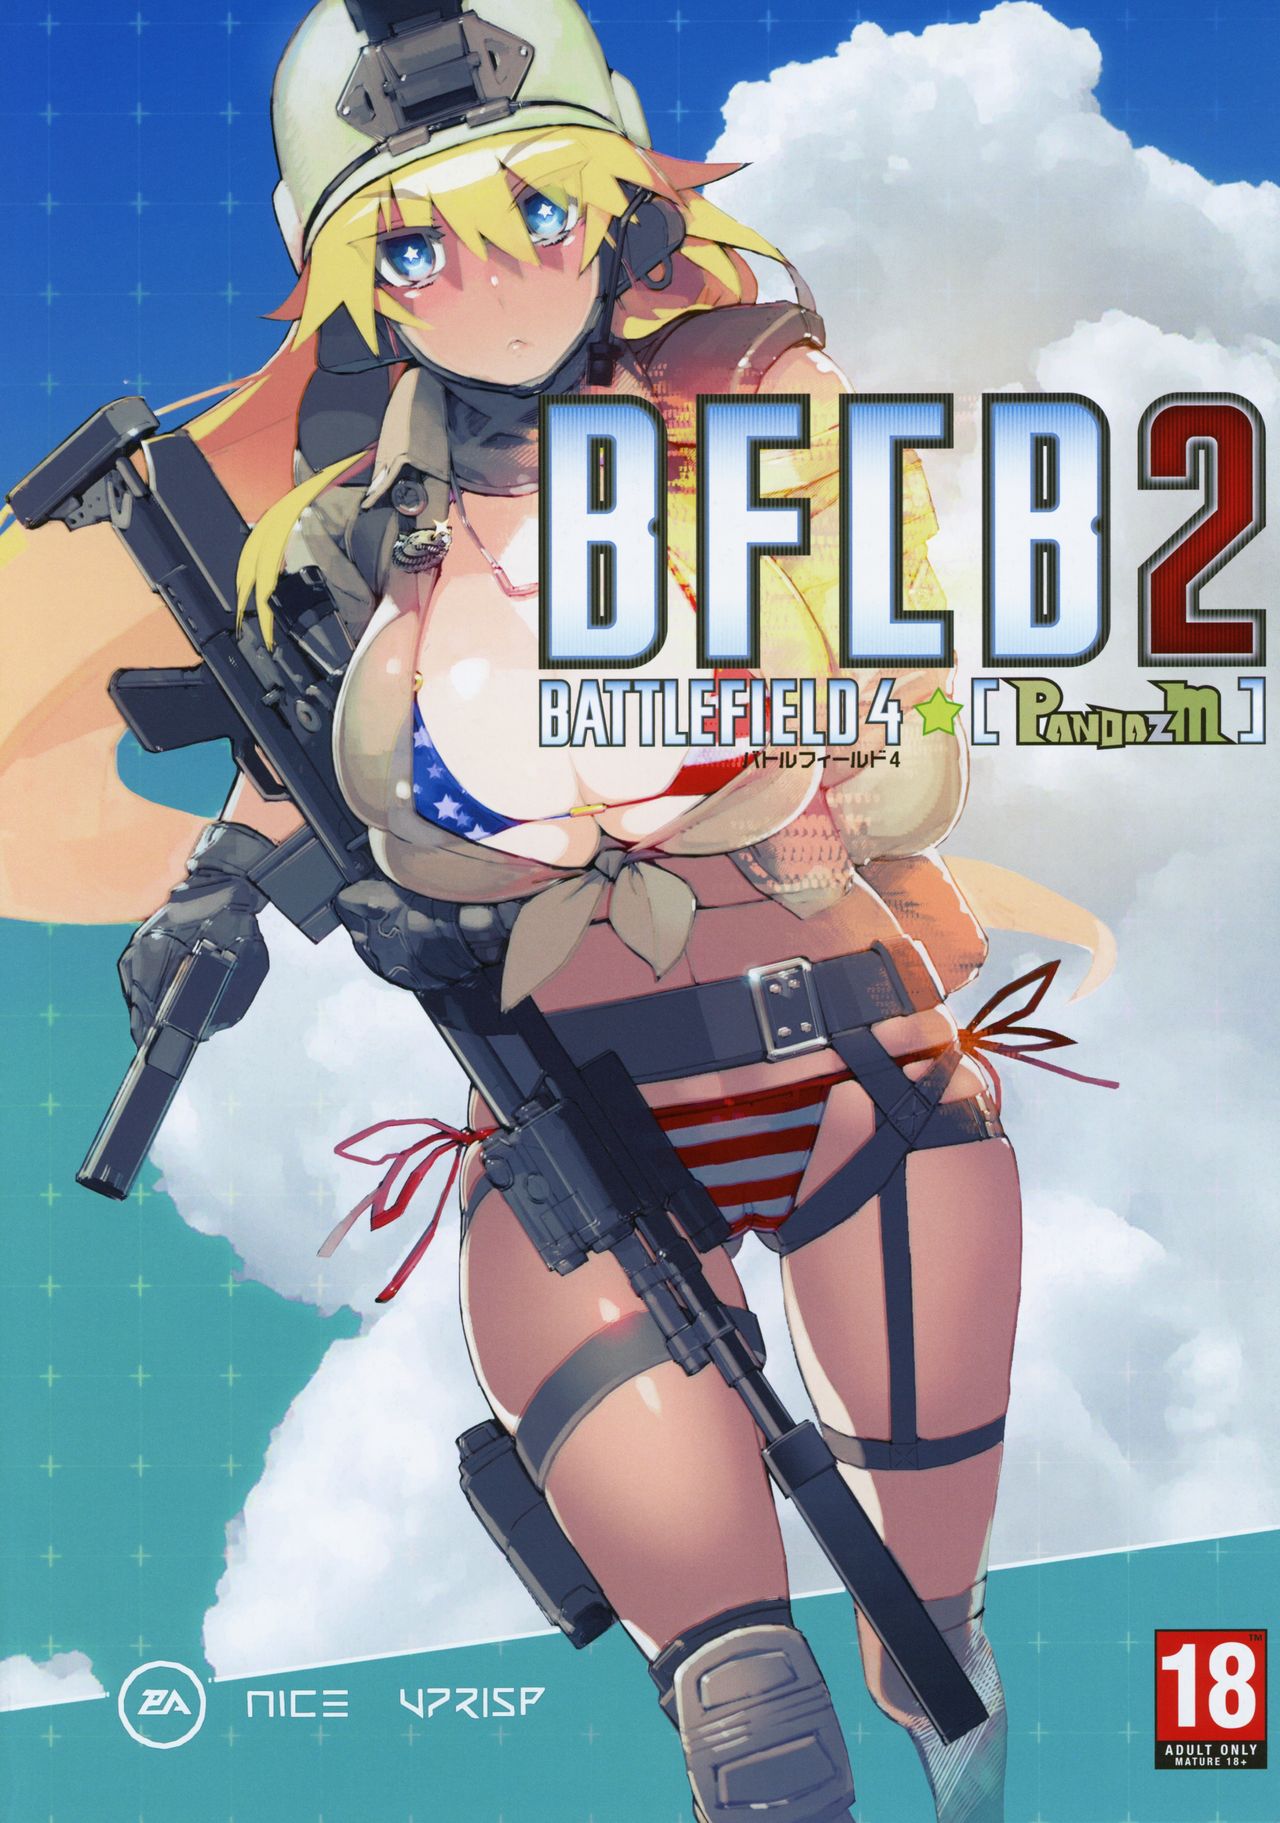 Bf4 Download Sex Video Hd - BFCB2 BATTLEFIELD 4 - Page 1 - HentaiEra